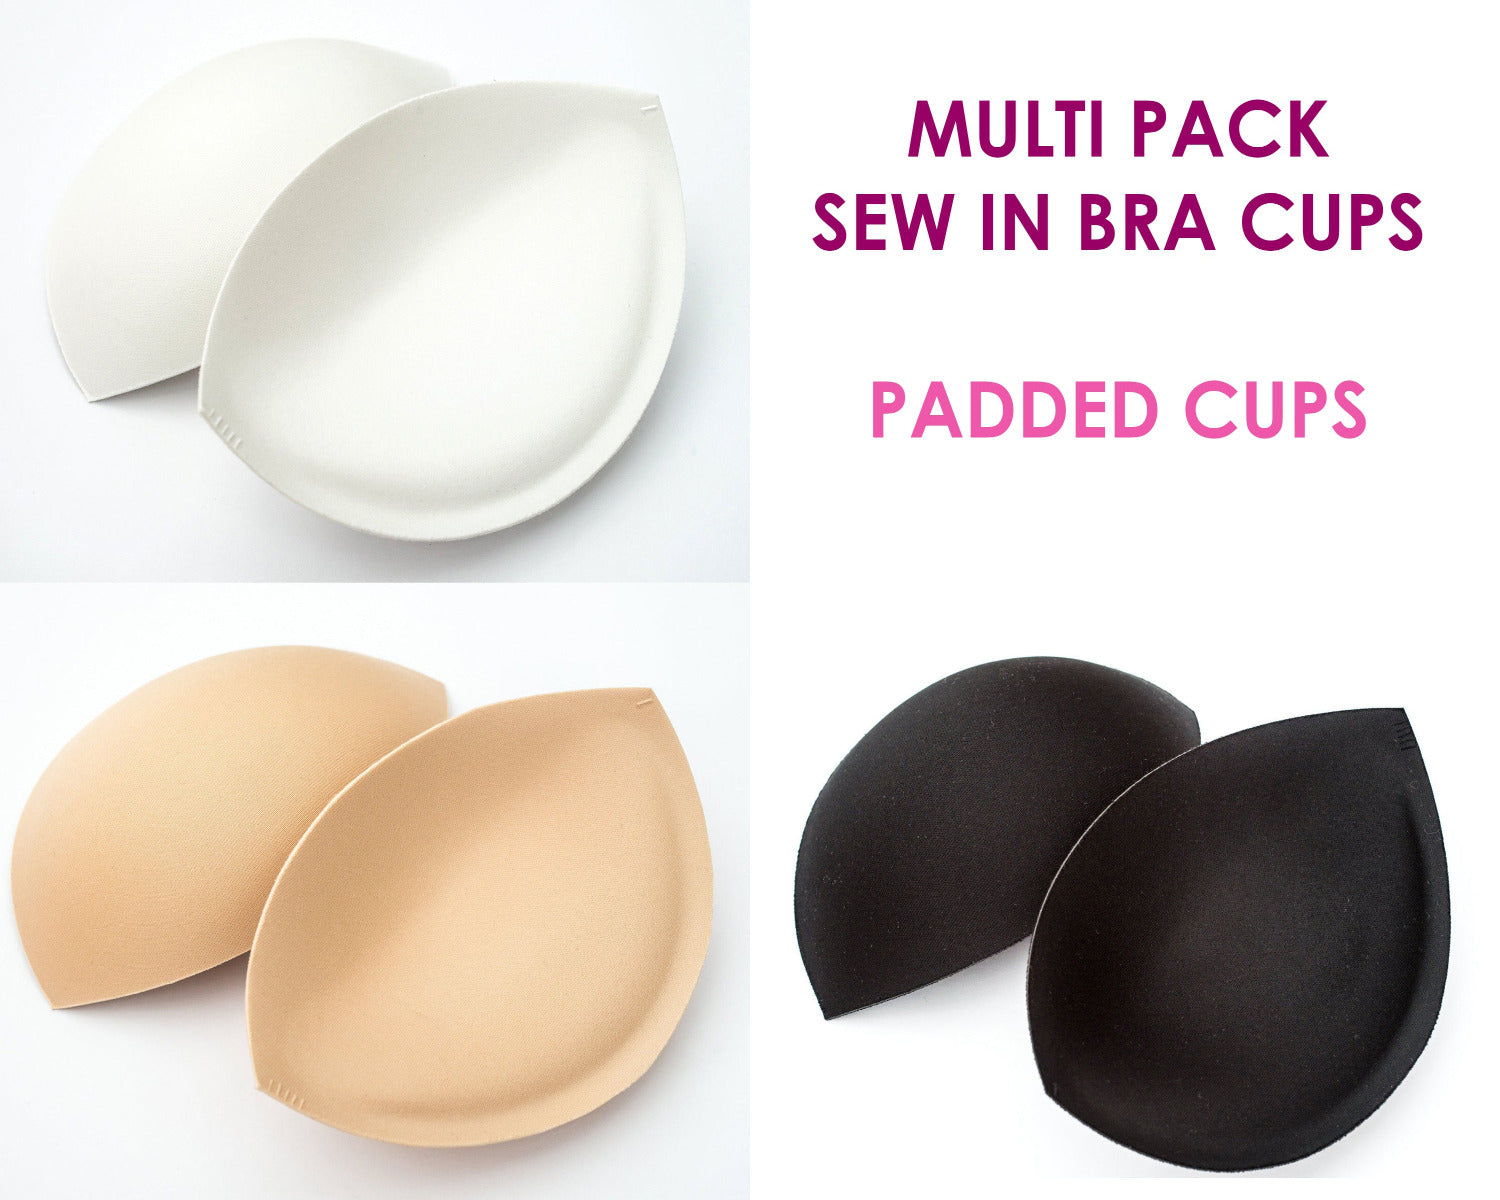 Sew in Bra Cups MULTI-PACK 3, 6, 9 OR 12 Pairs of Quality Sew in